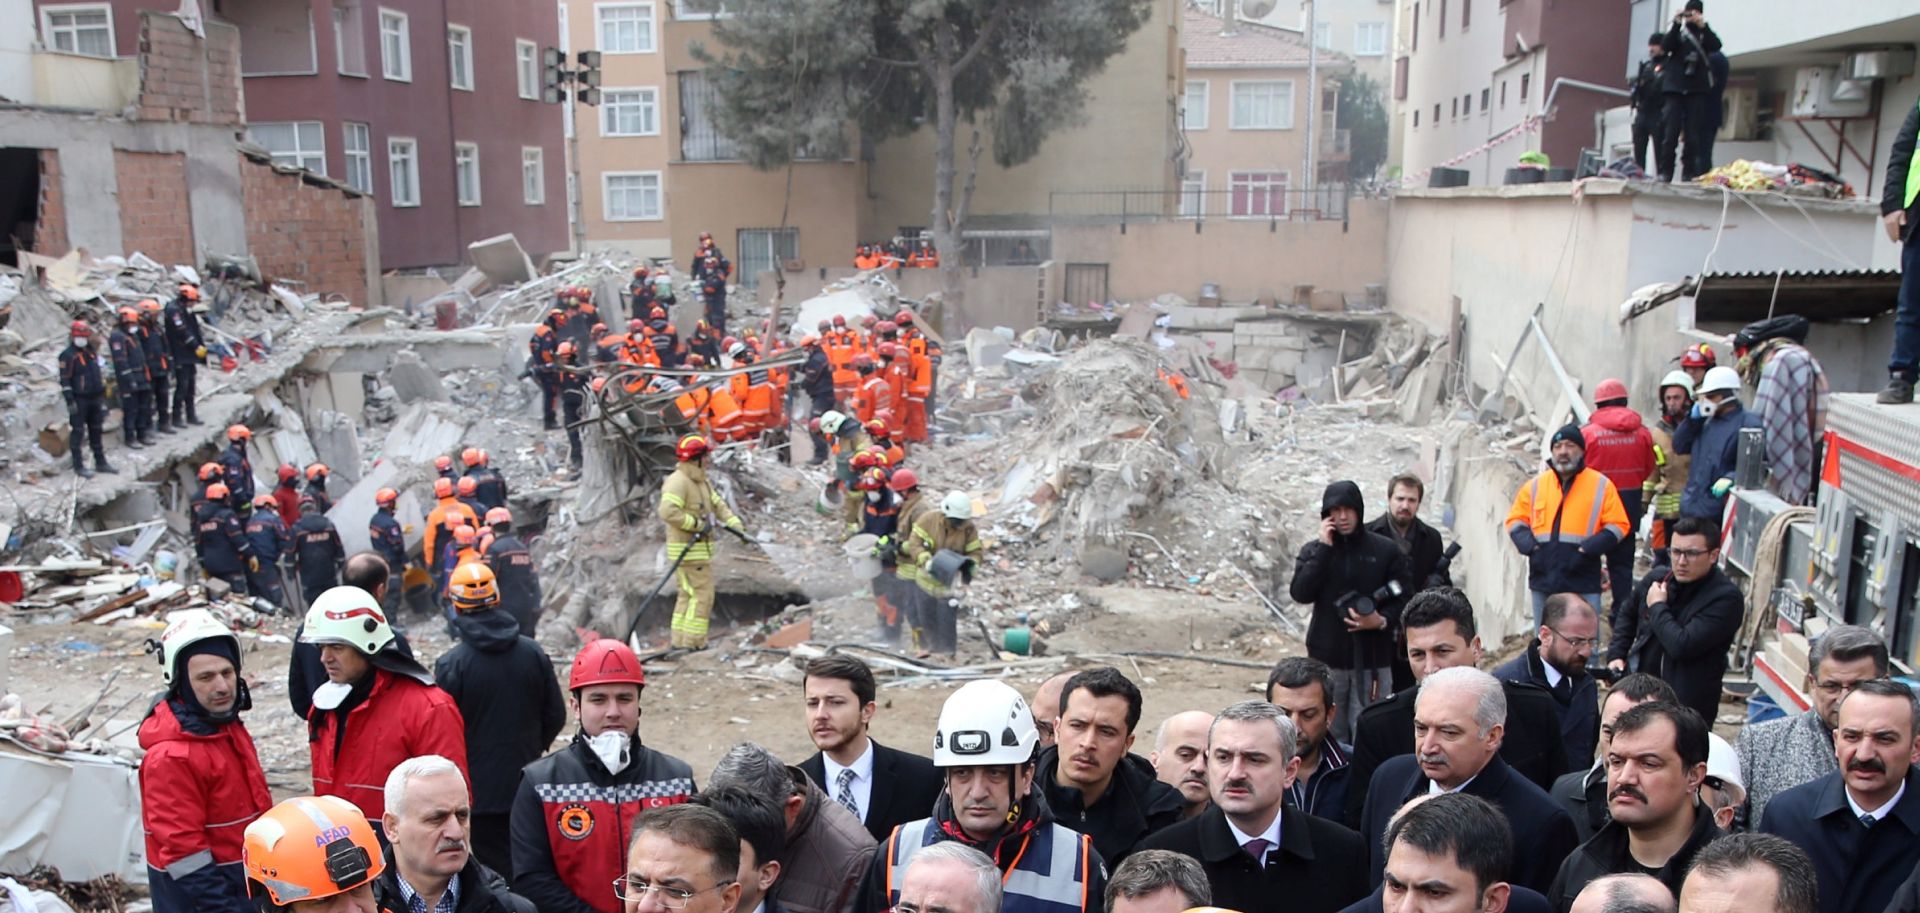 Turkish President Erdogan visits the site of a collapsed residential building in Istanbul Turkish President Tayyip Erdogan visits the site of a collapsed residential building in Istanbul, Turkey February 9, 2019. Murat Kula/Presidential Press Office/Handout via REUTERS ATTENTION EDITORS - THIS PICTURE WAS PROVIDED BY A THIRD PARTY. NO RESALES. NO ARCHIVE HANDOUT